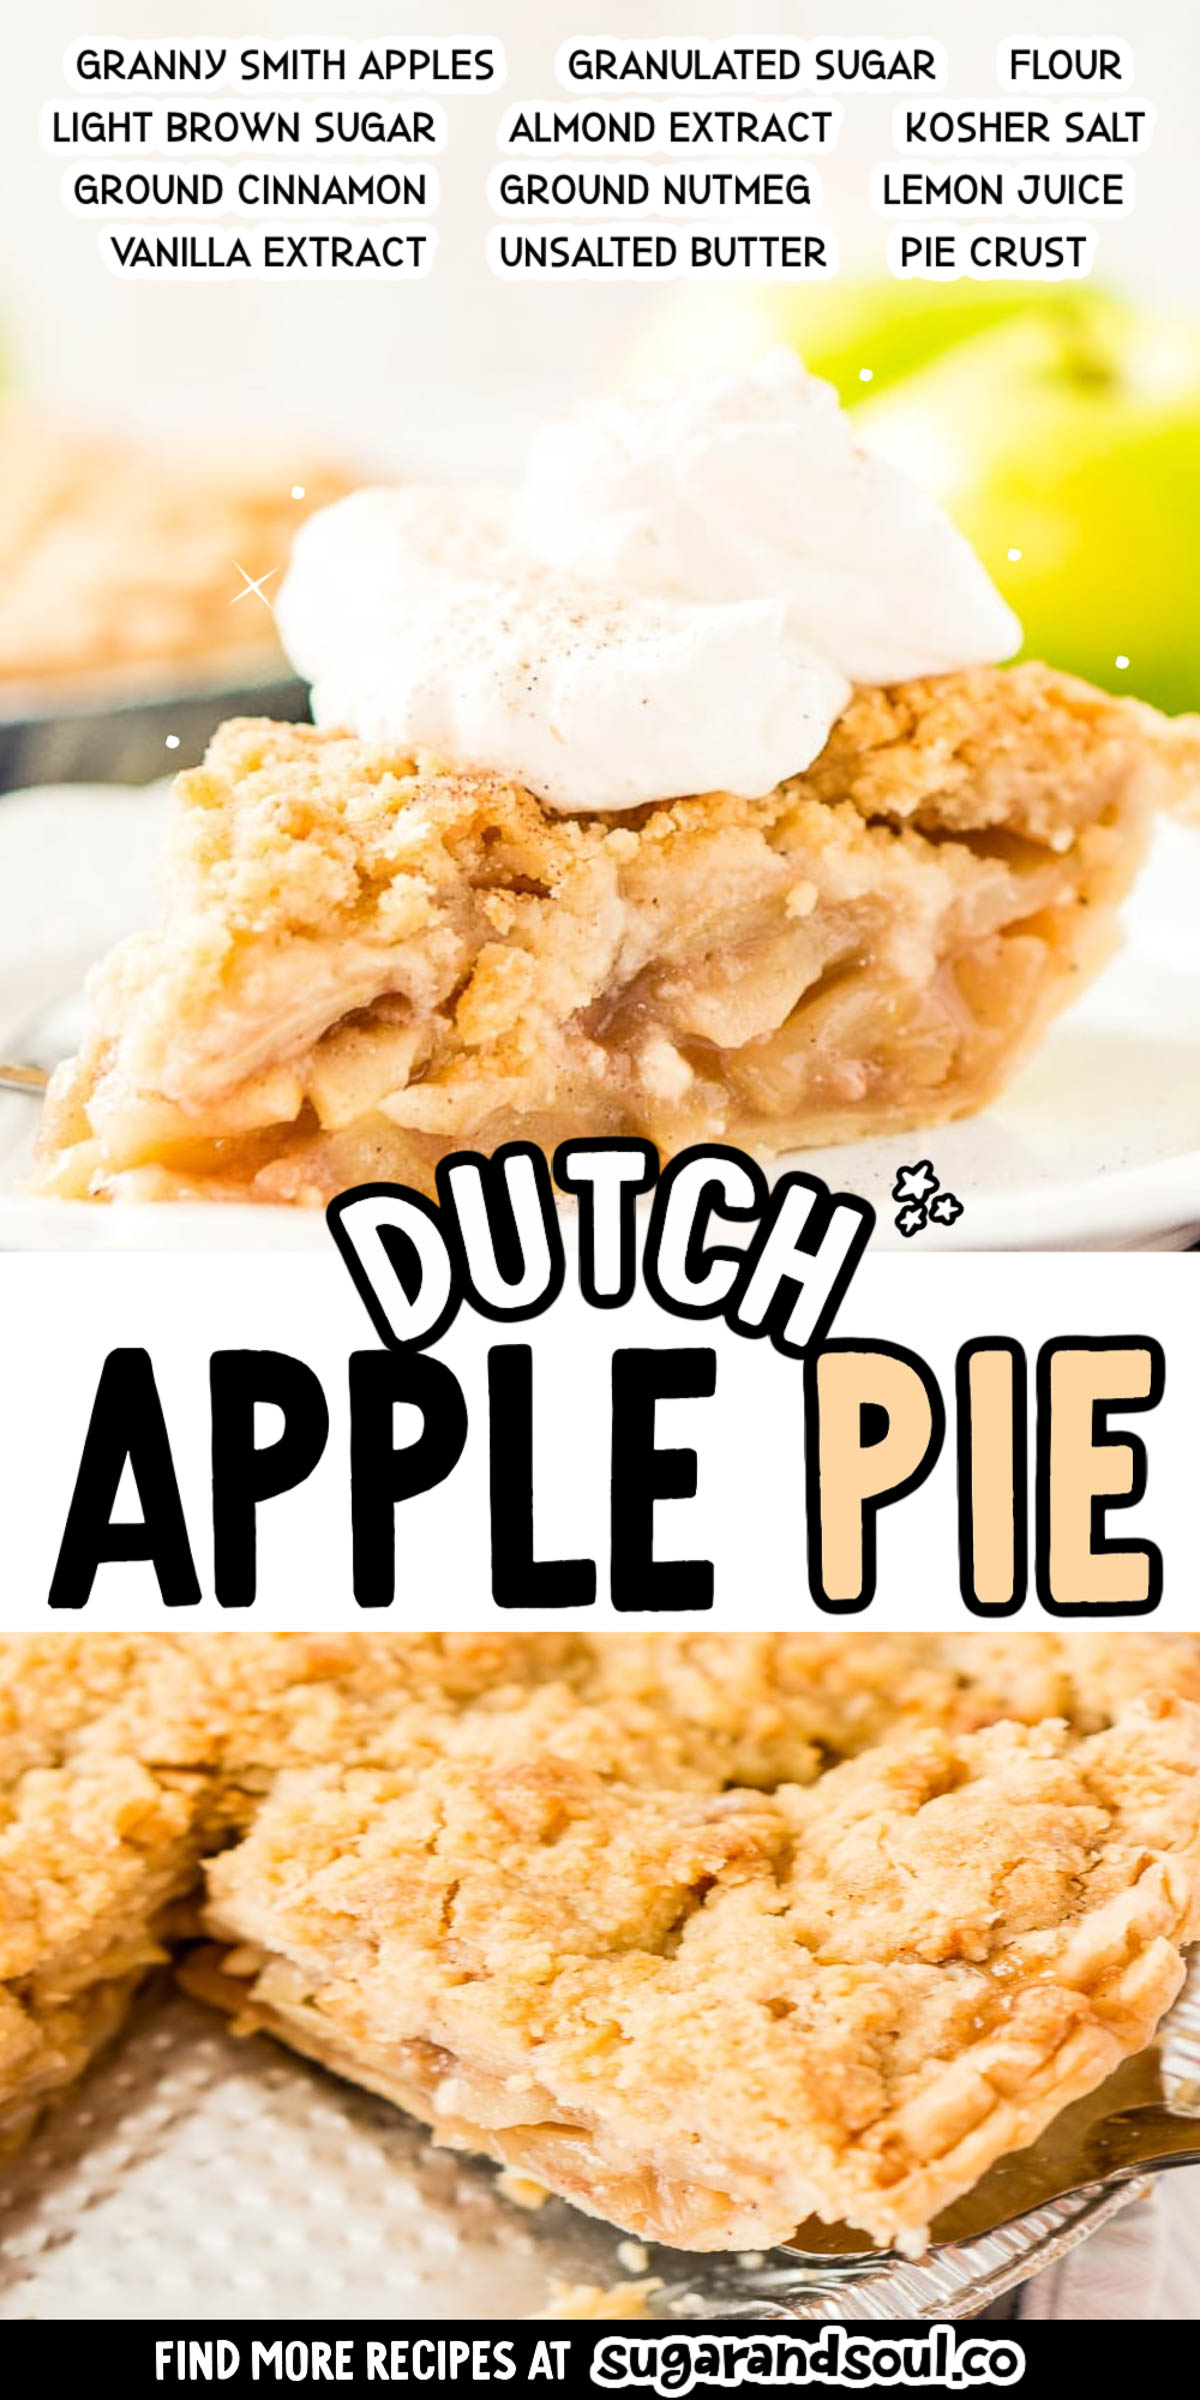 Dutch Apple Pie is made with a spiced apple filling in a flaky pie crust topped with a streusel made of flour, sugar, and butter. via @sugarandsoulco